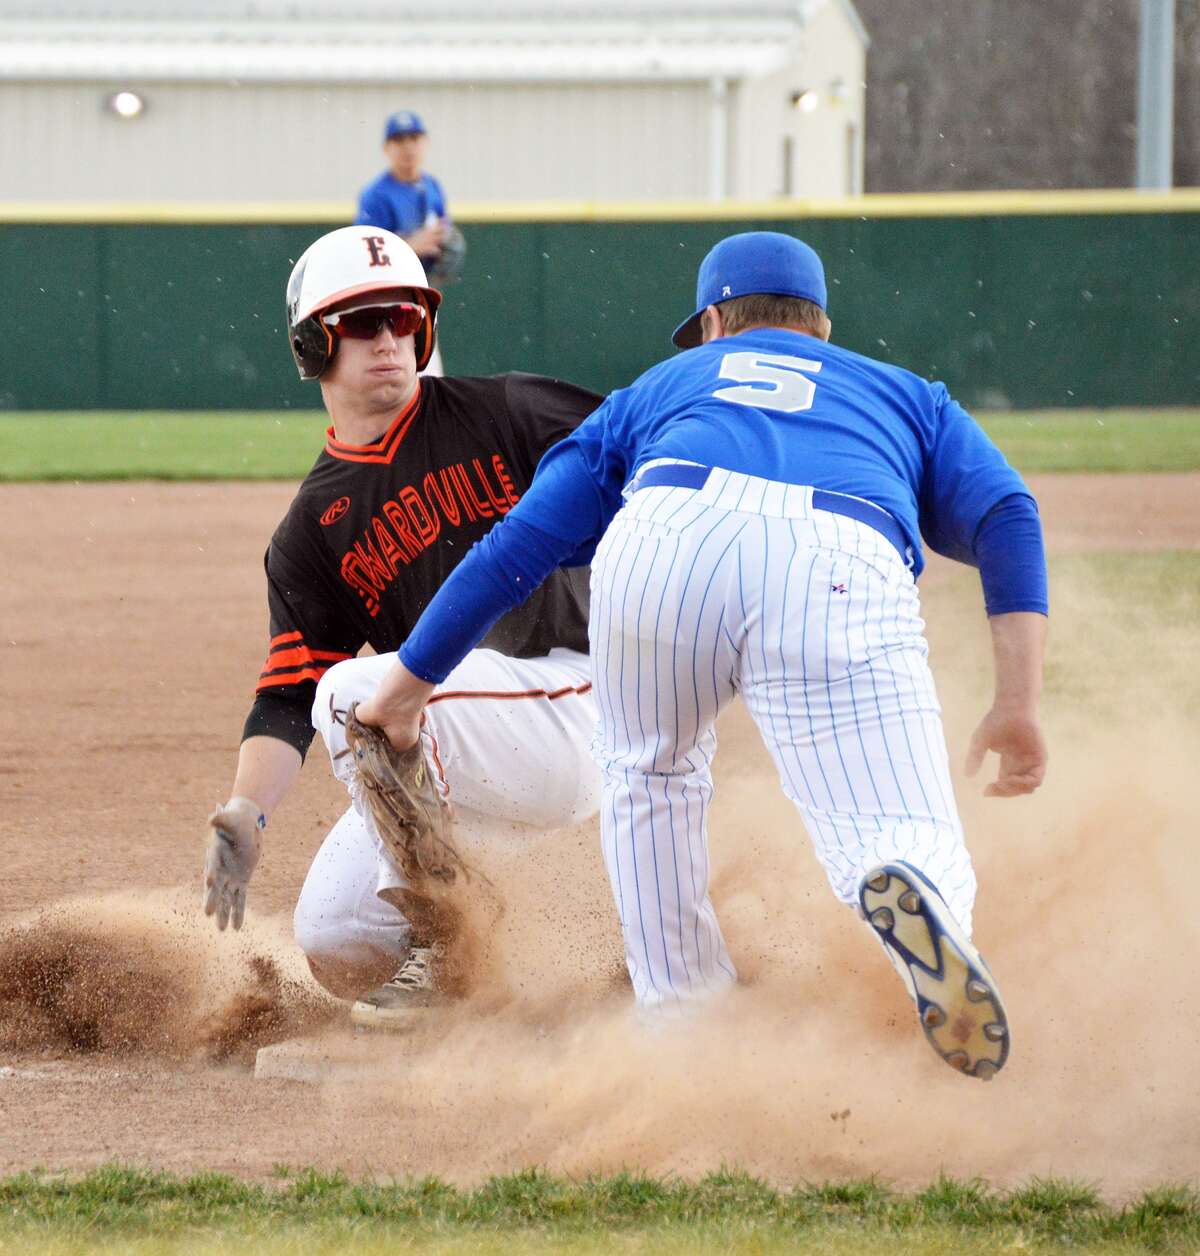 Edwardsville’s Dylan Burris, left, slides safely into third base for a stolen base in the first inning against Greenville.